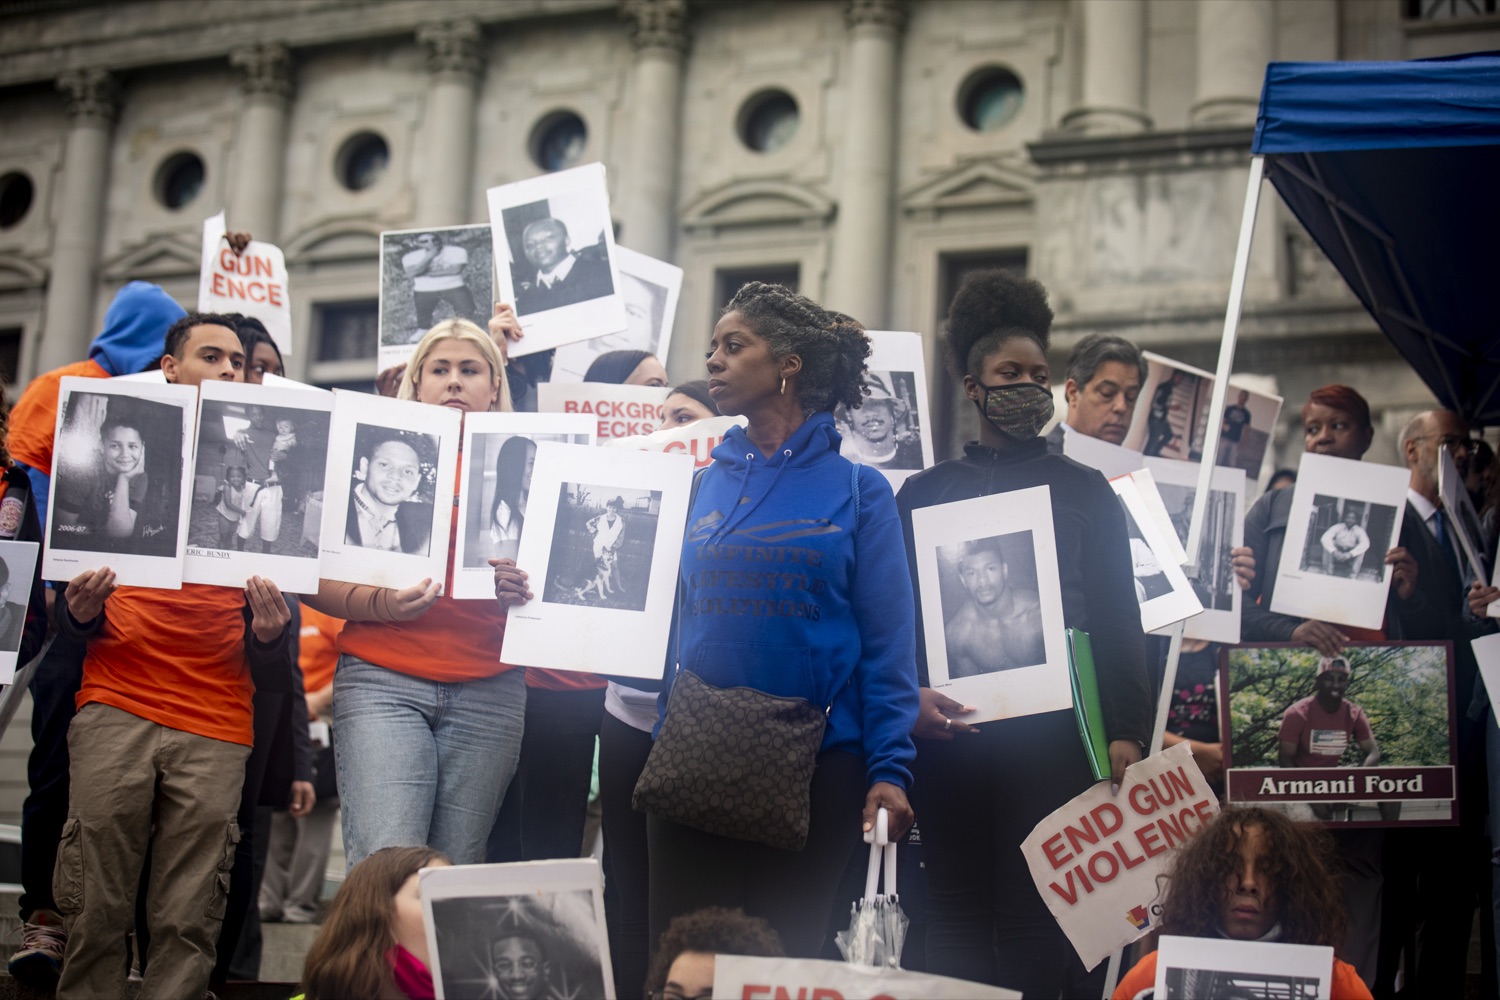 More than 200 Pennsylvanians at the Capitol call for legislative action to save lives against gun violence, in Harrisburg, PA on April 26, 2022.<br><a href="https://filesource.amperwave.net/commonwealthofpa/photo/20782_gov_ceaseFirePA_27.JPG" target="_blank">⇣ Download Photo</a>